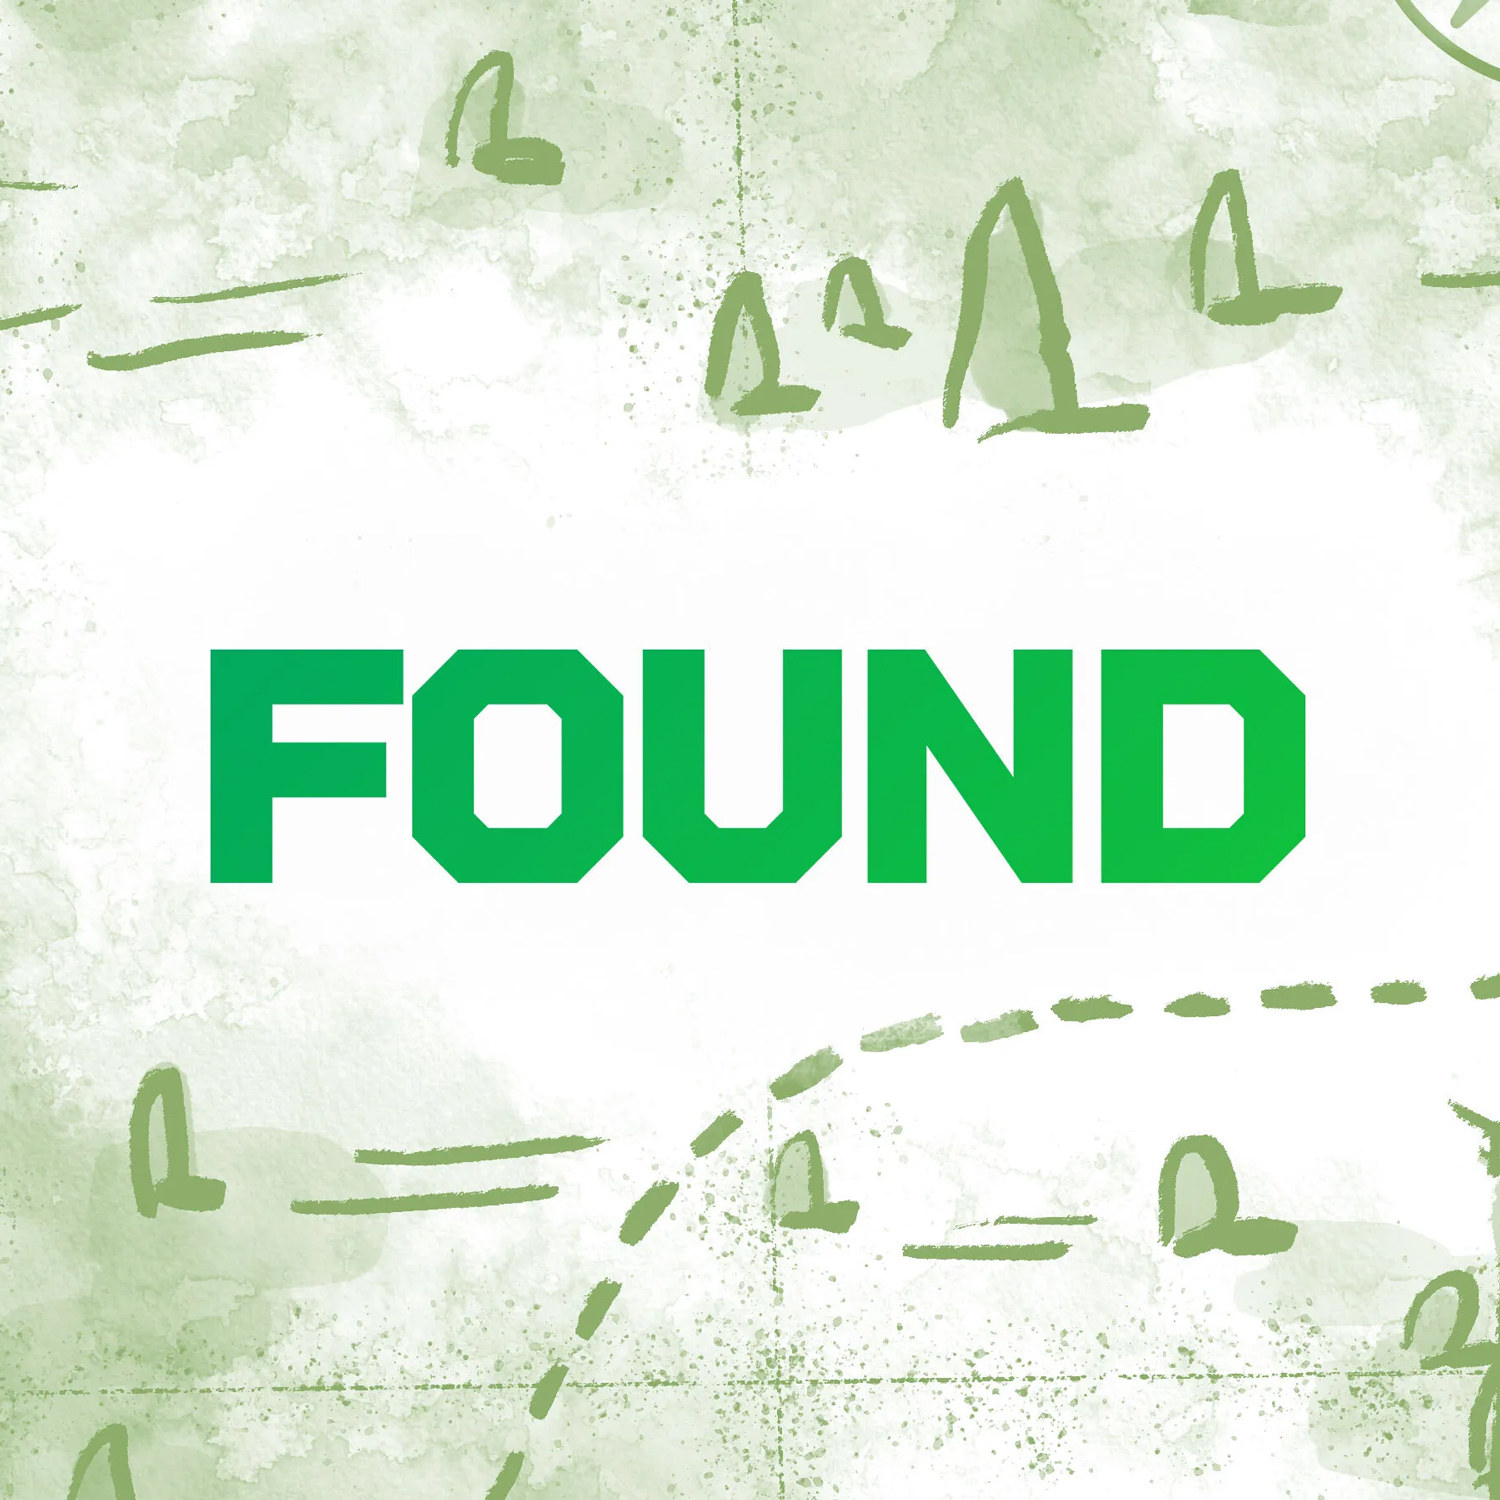 Aseel Debuts TechCrunch with FOUND Podcast on Expanding the Digital Economy